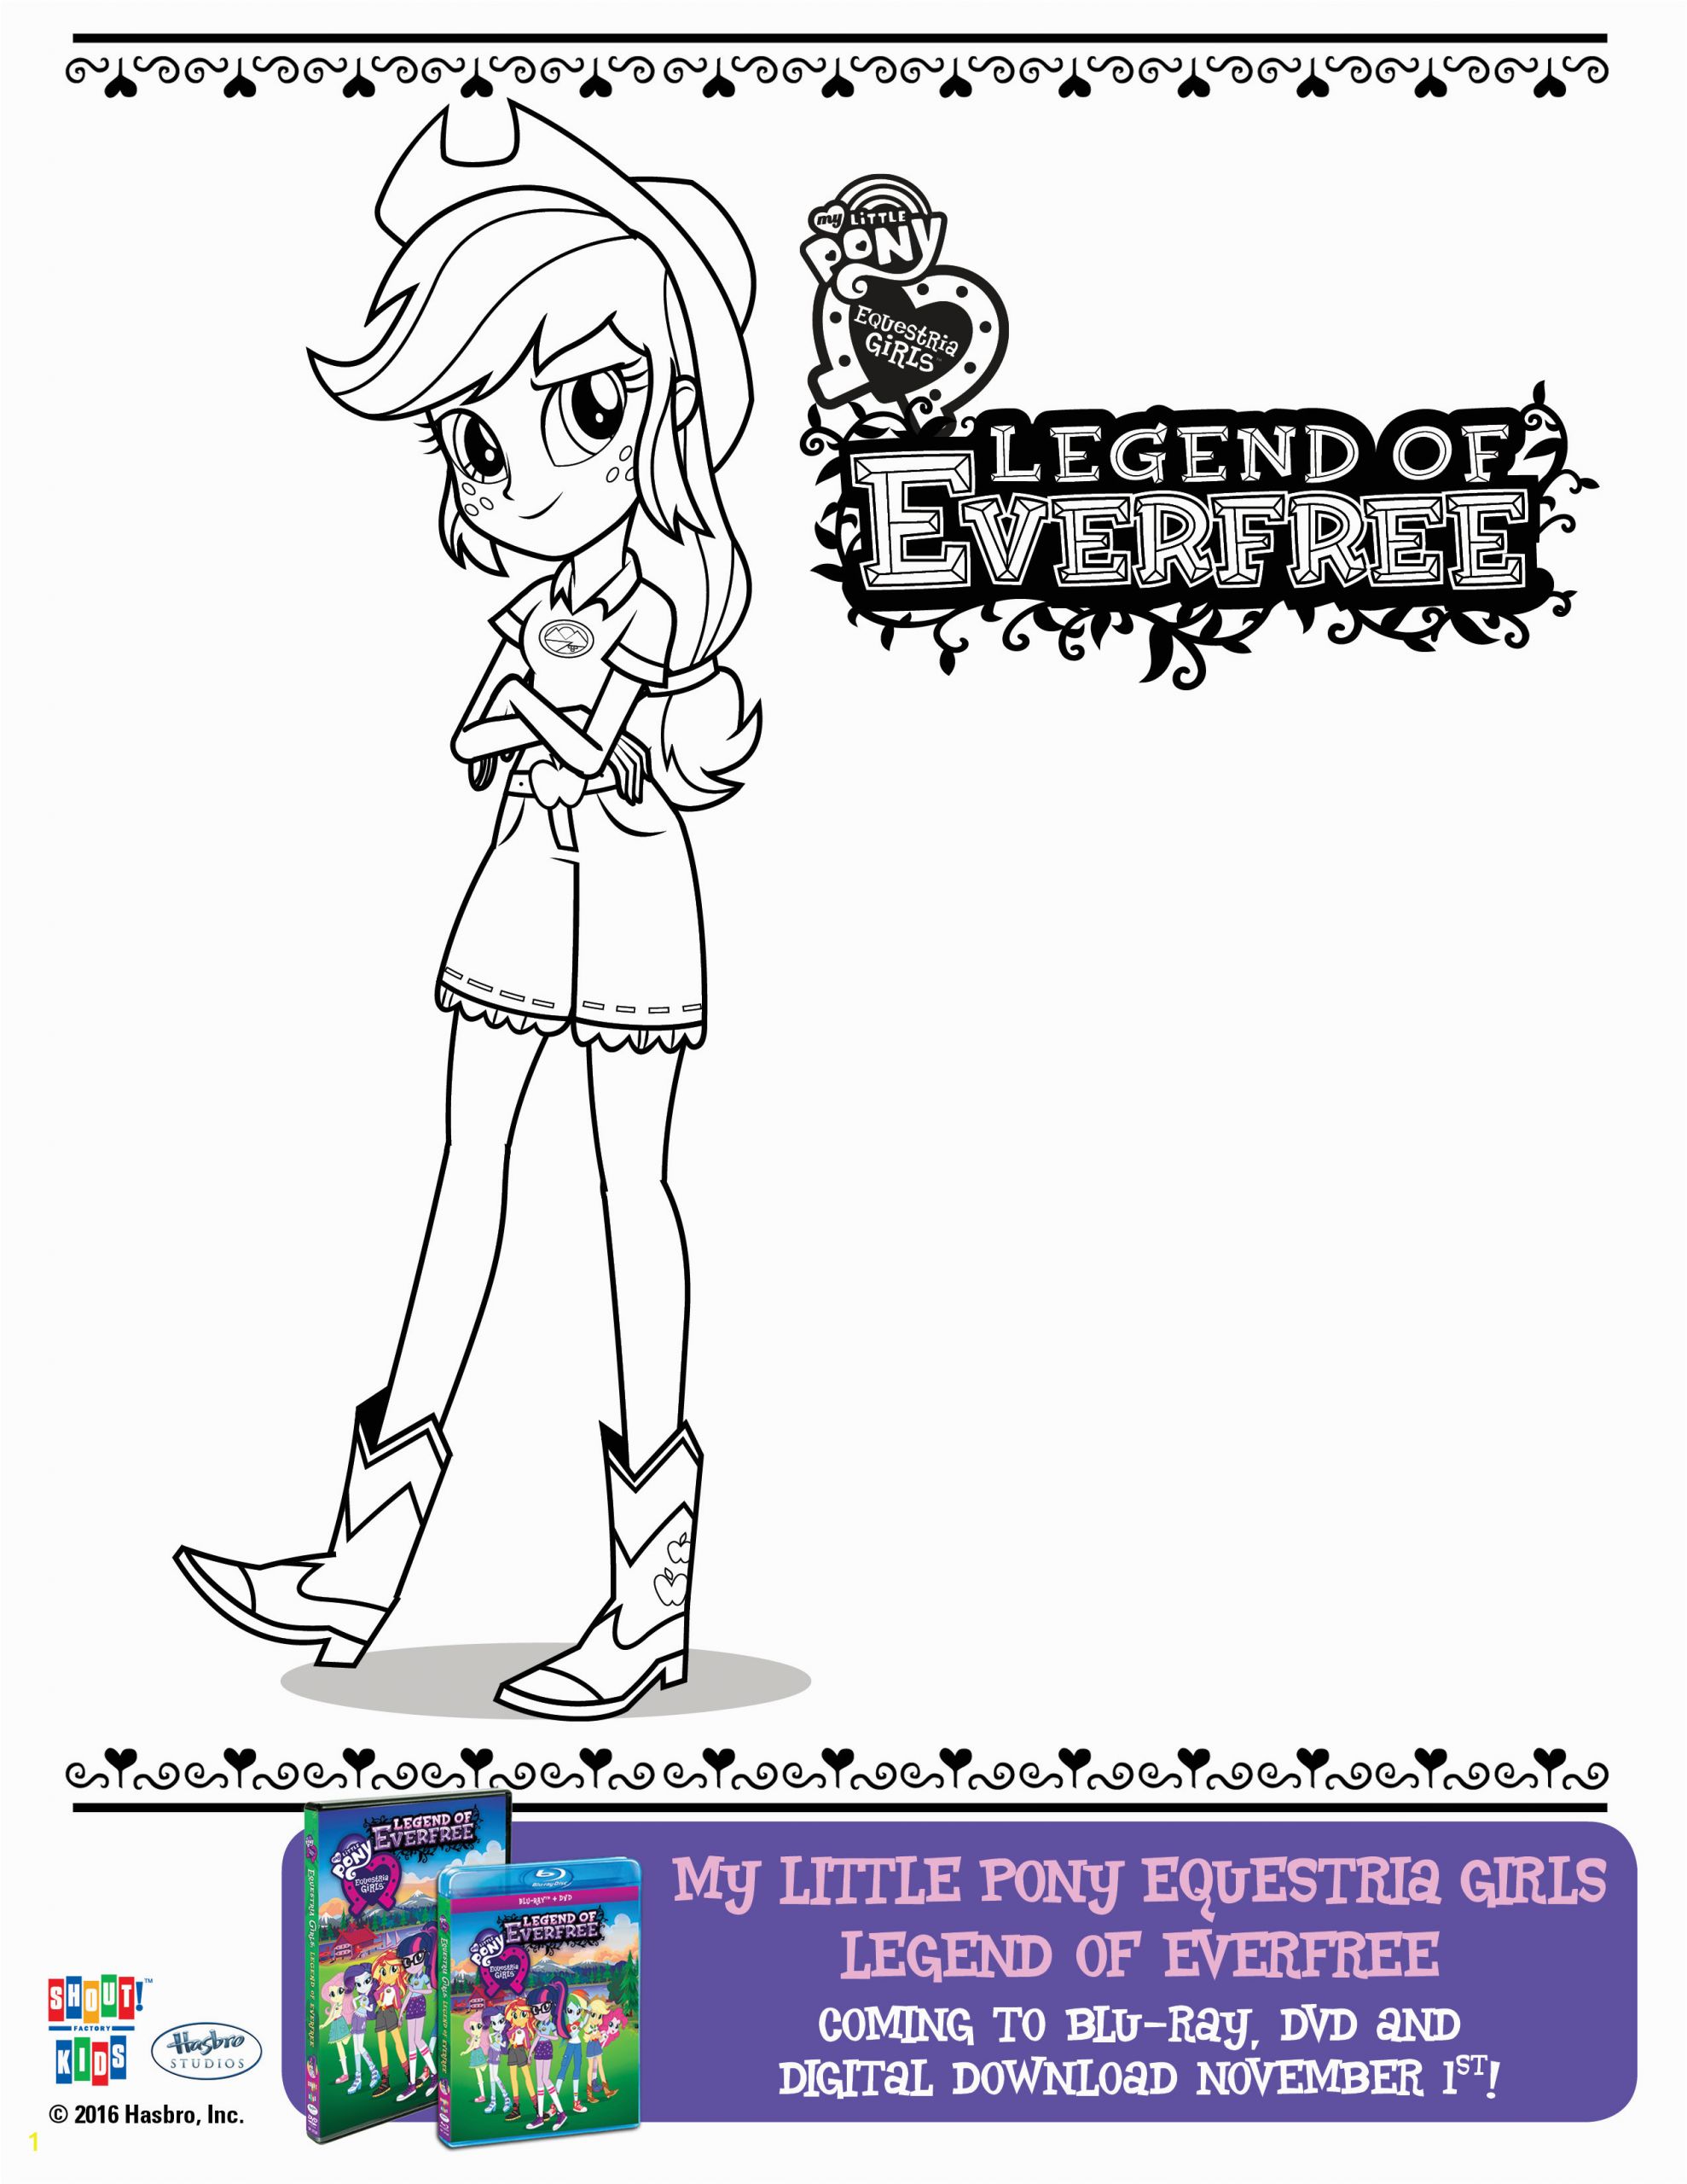 my little pony equestria girls legend of everfree dvd giveaway